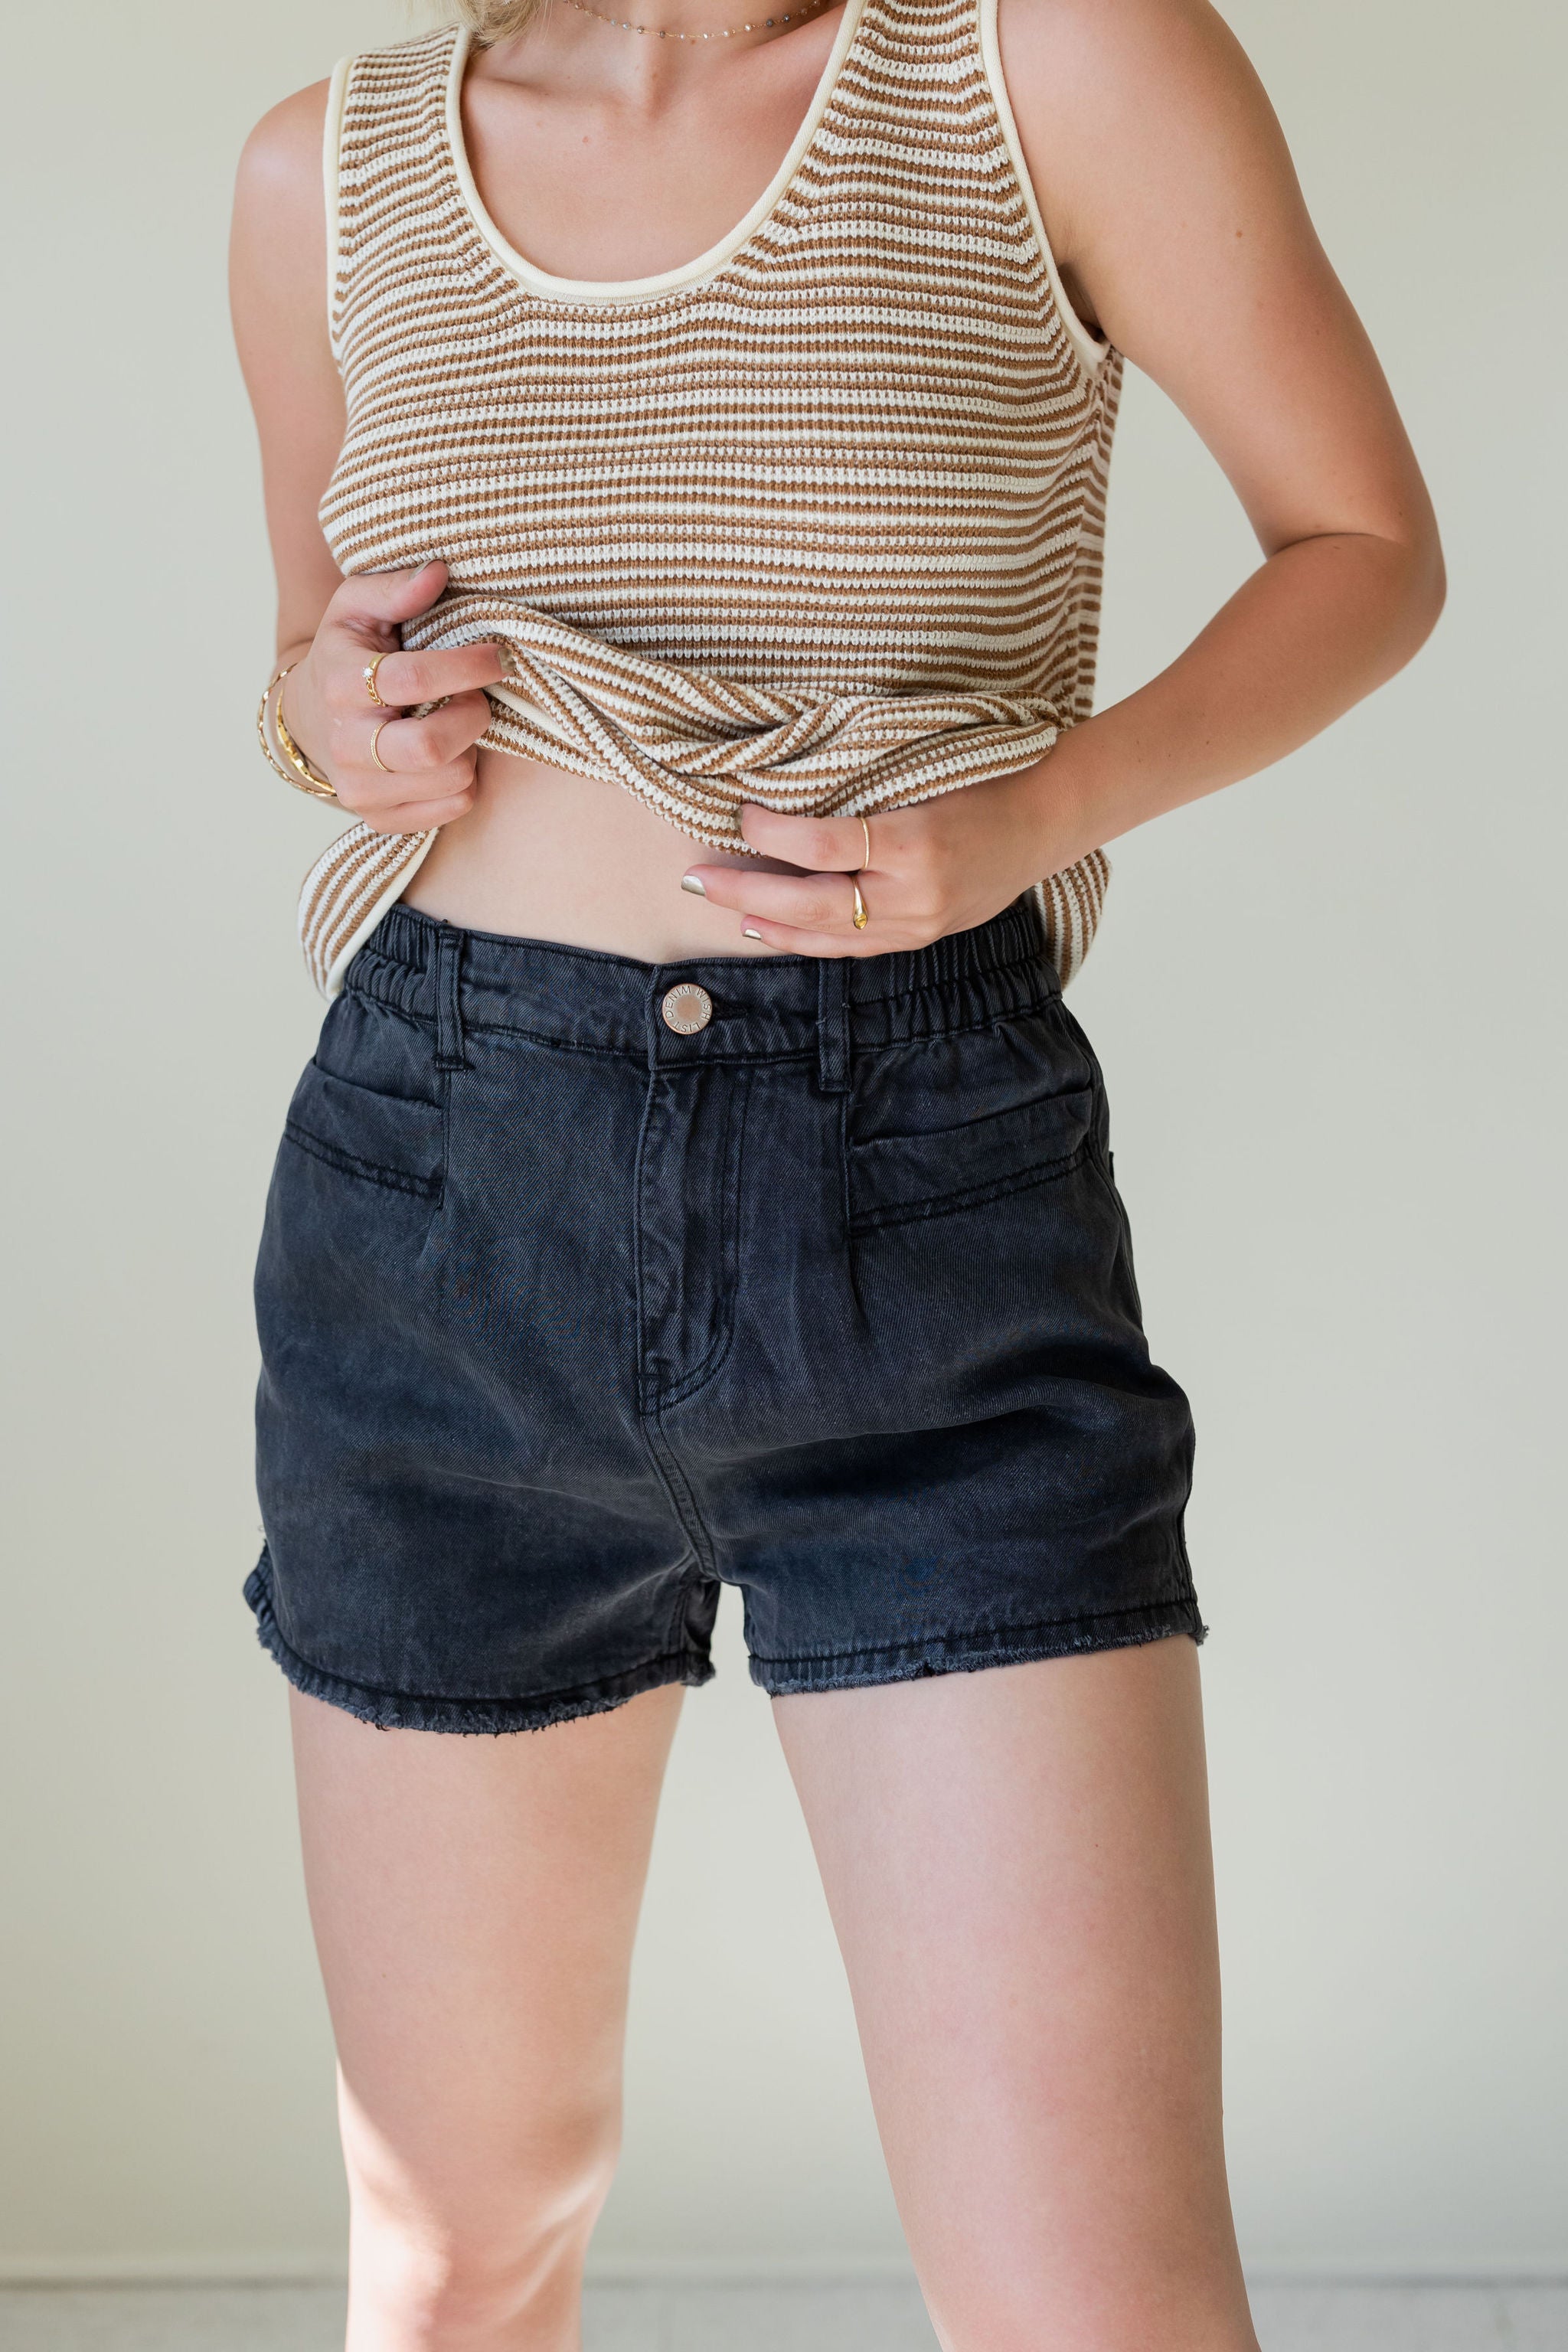 Let's Pretend Denim Shorts by For Good